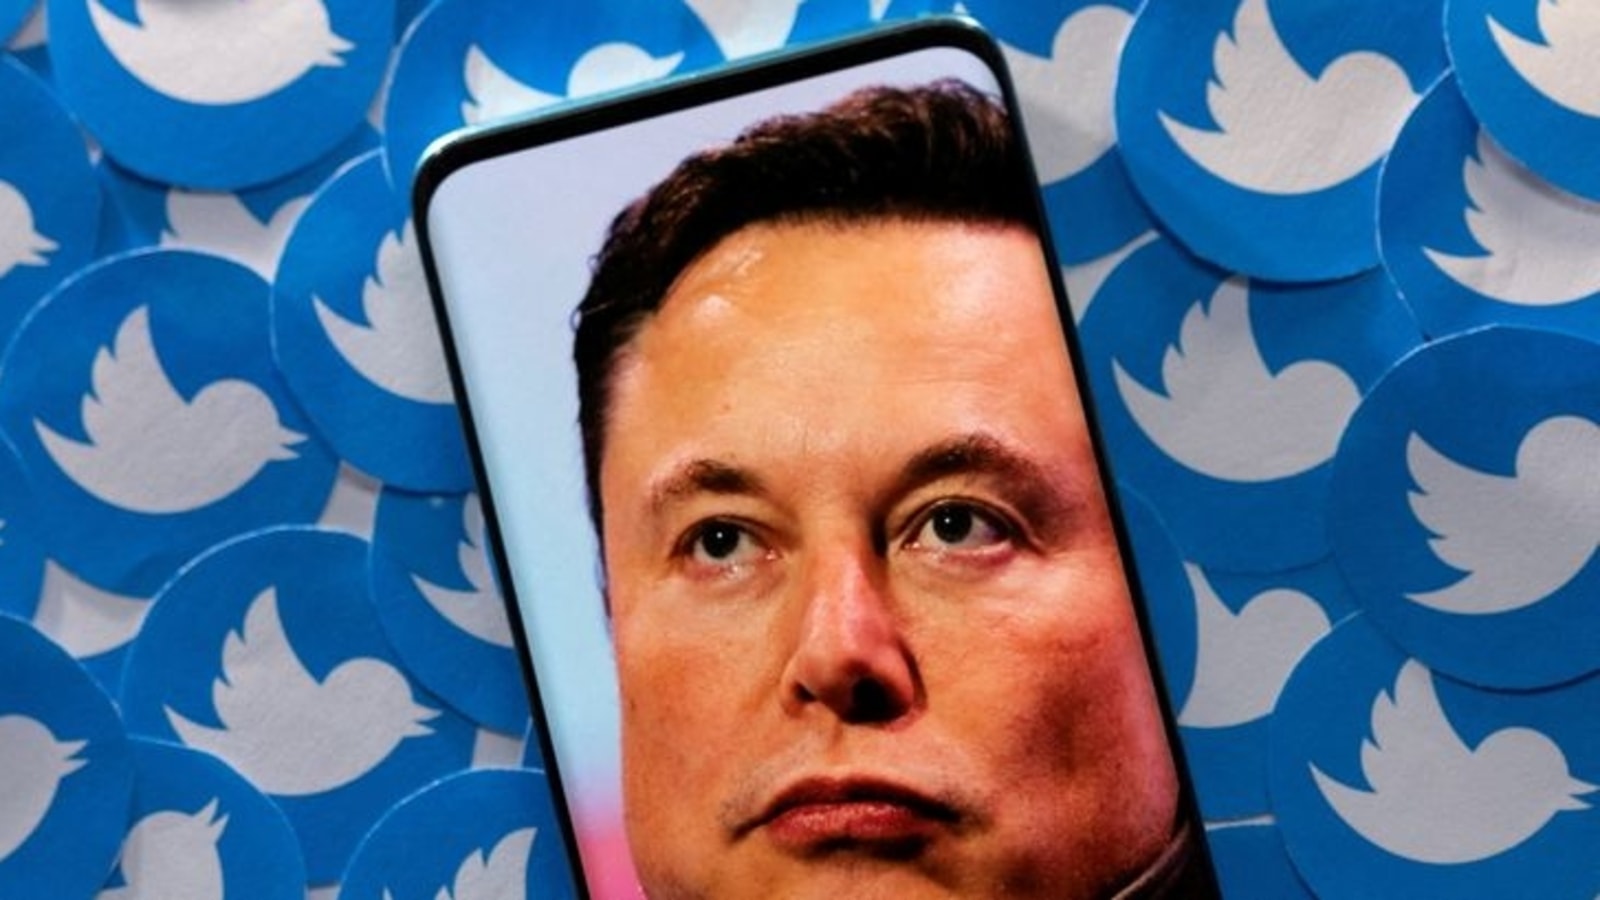 Twitter says waiting period for Elon Musk's $44 billion acquisition deal has expired